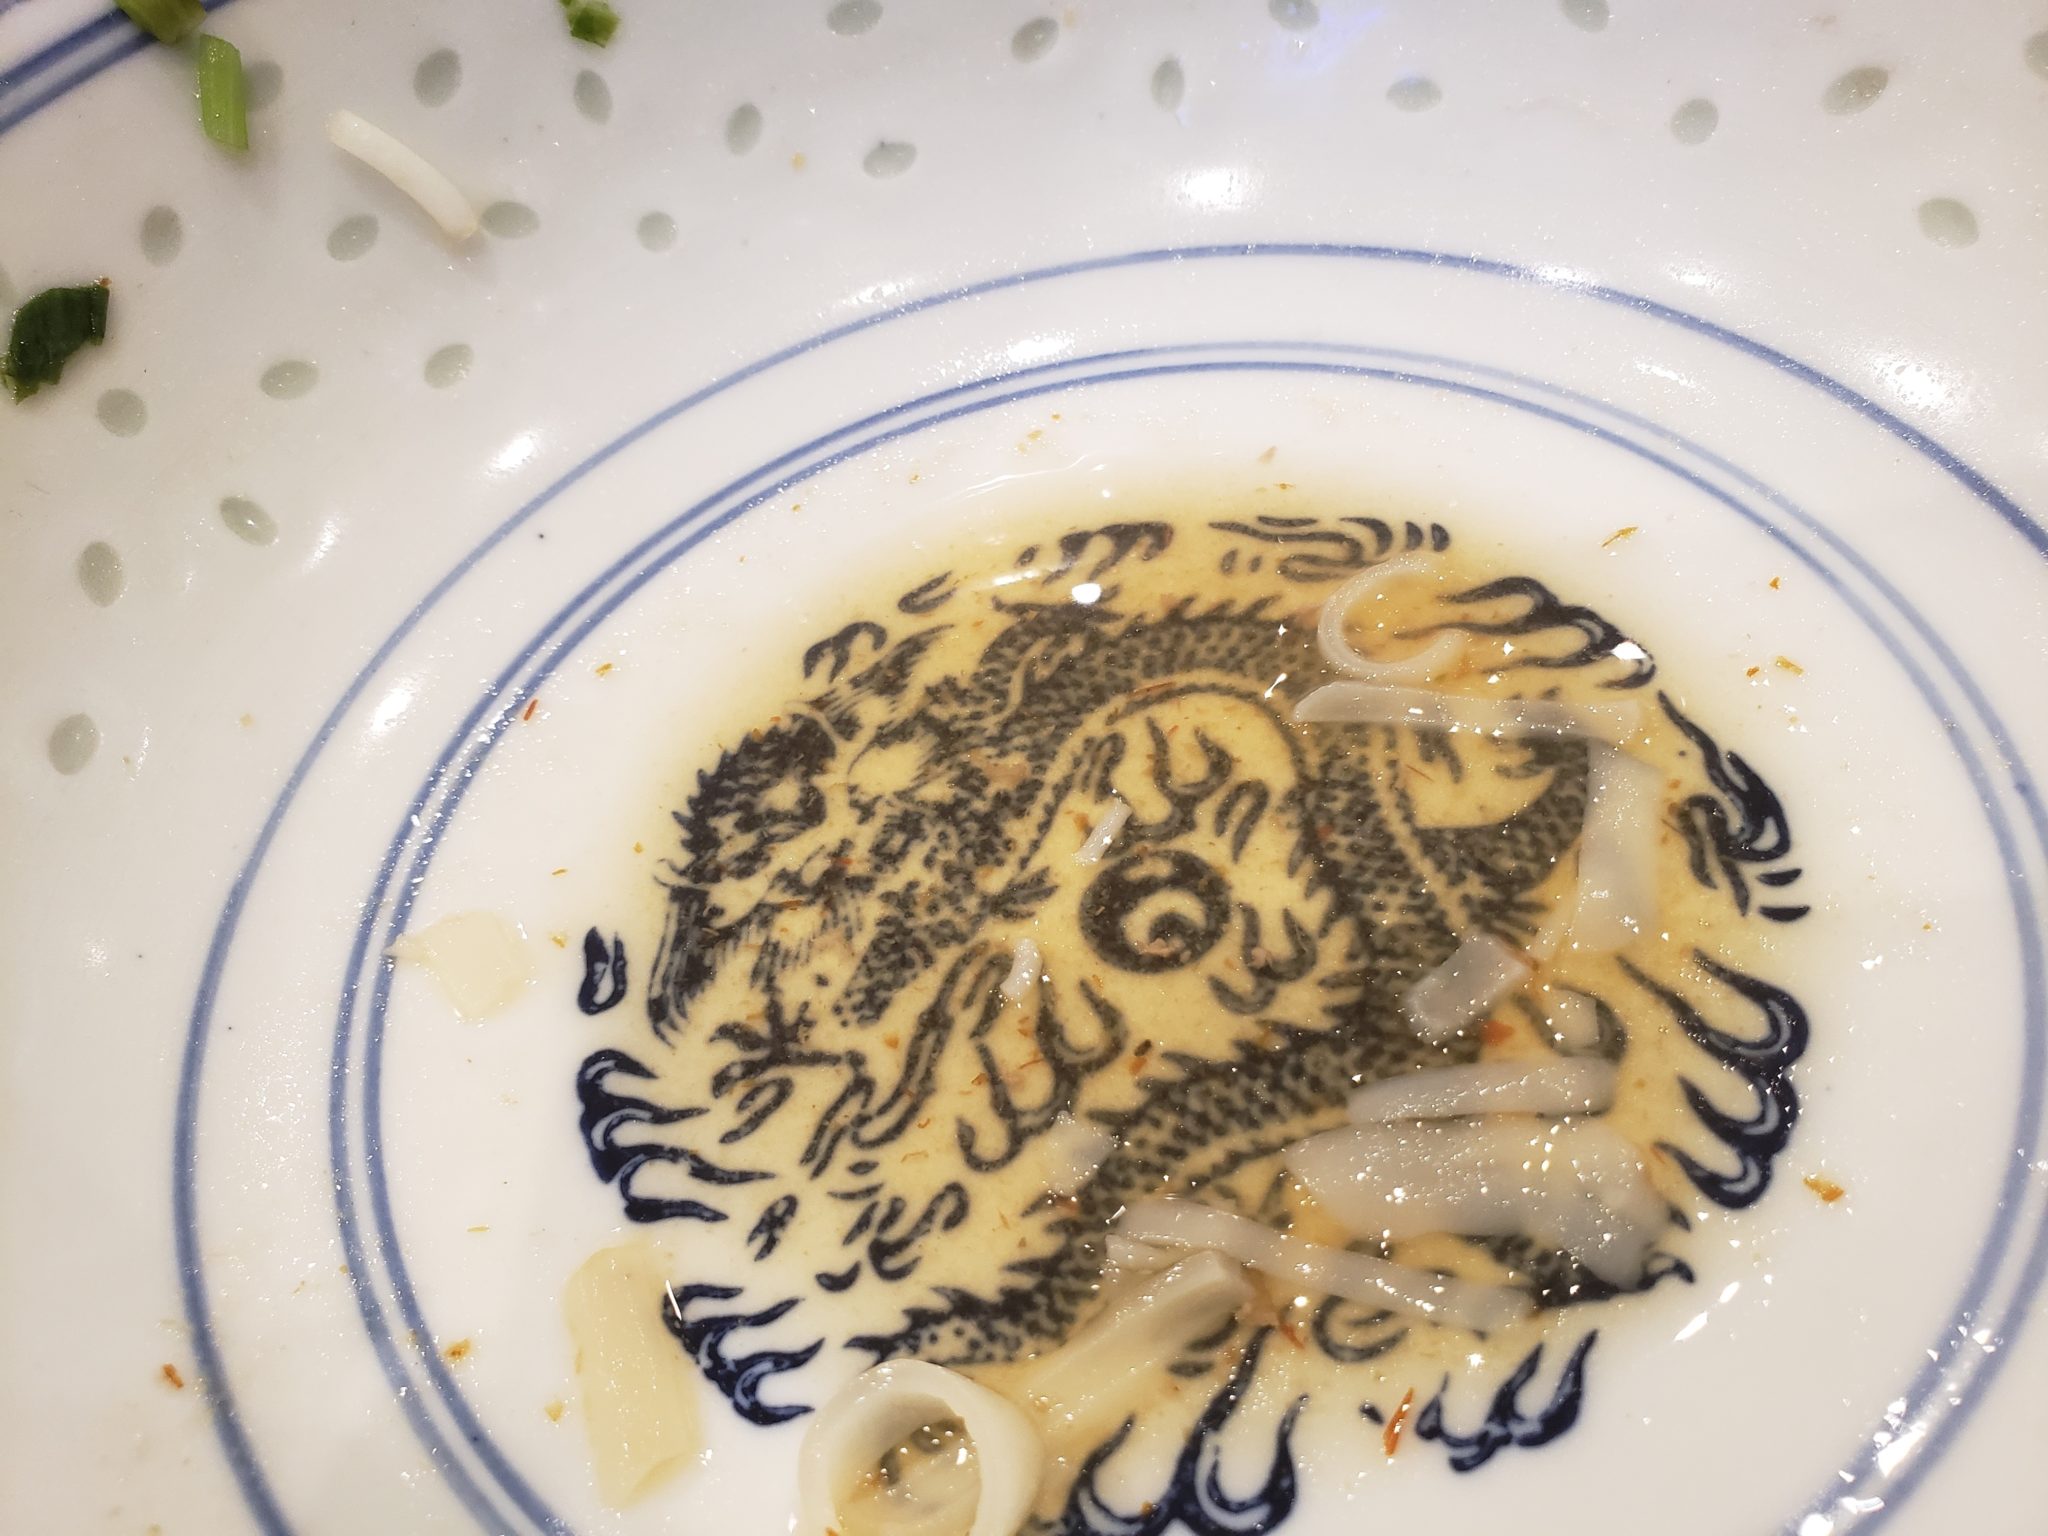 a plate with a drawing on it